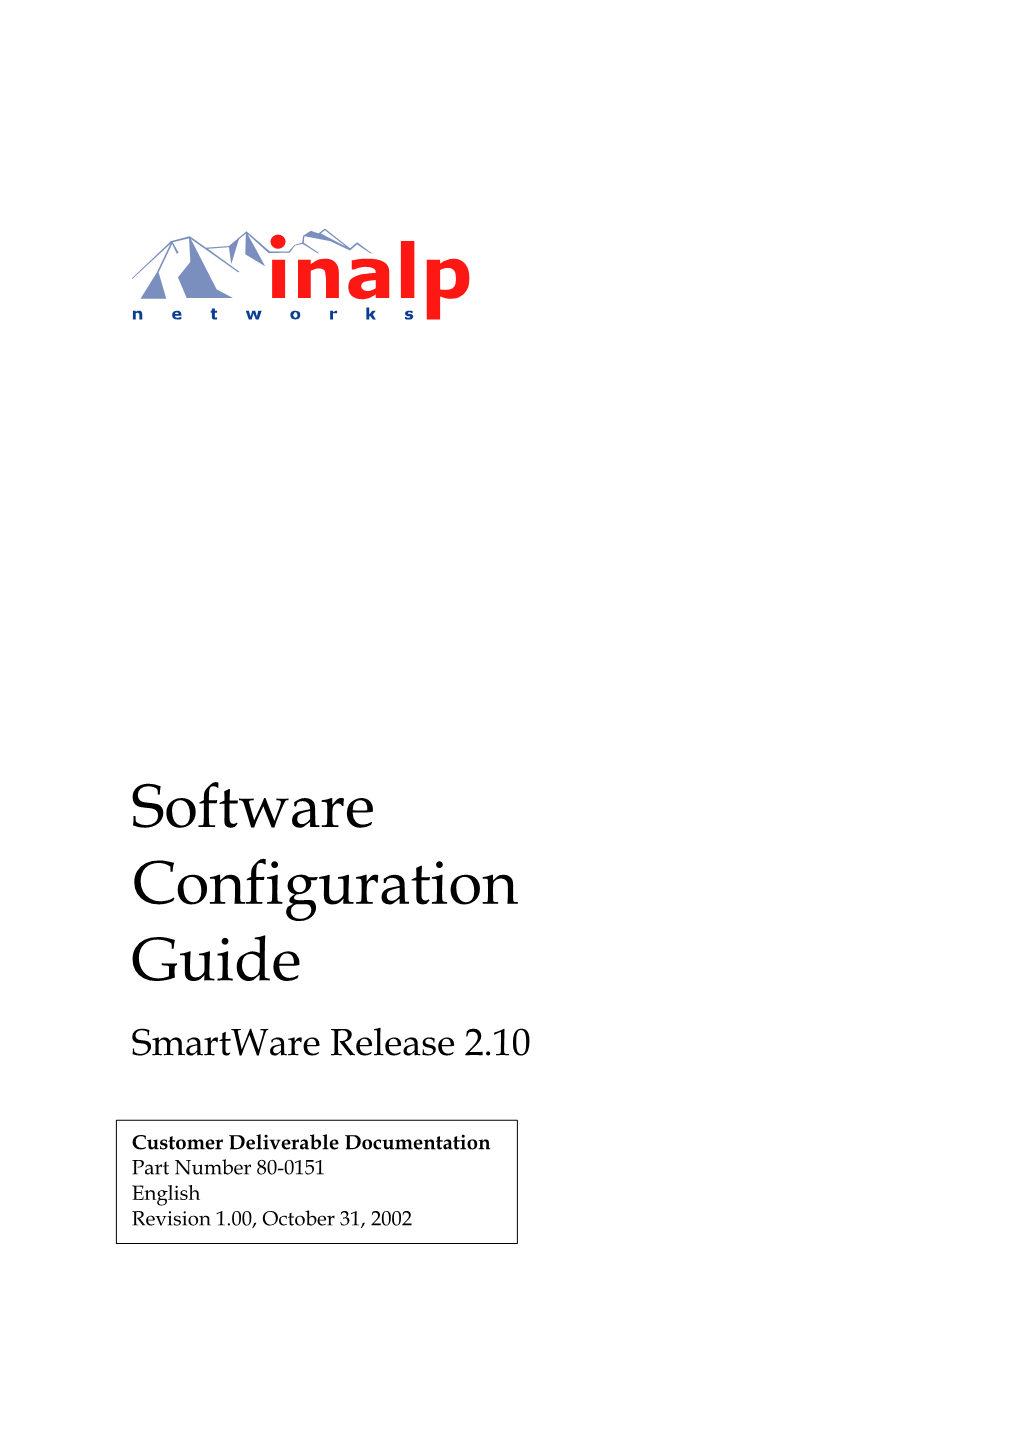 Software Configuration Guide Release 2.10, Revision 1.00 Legal Notice 3